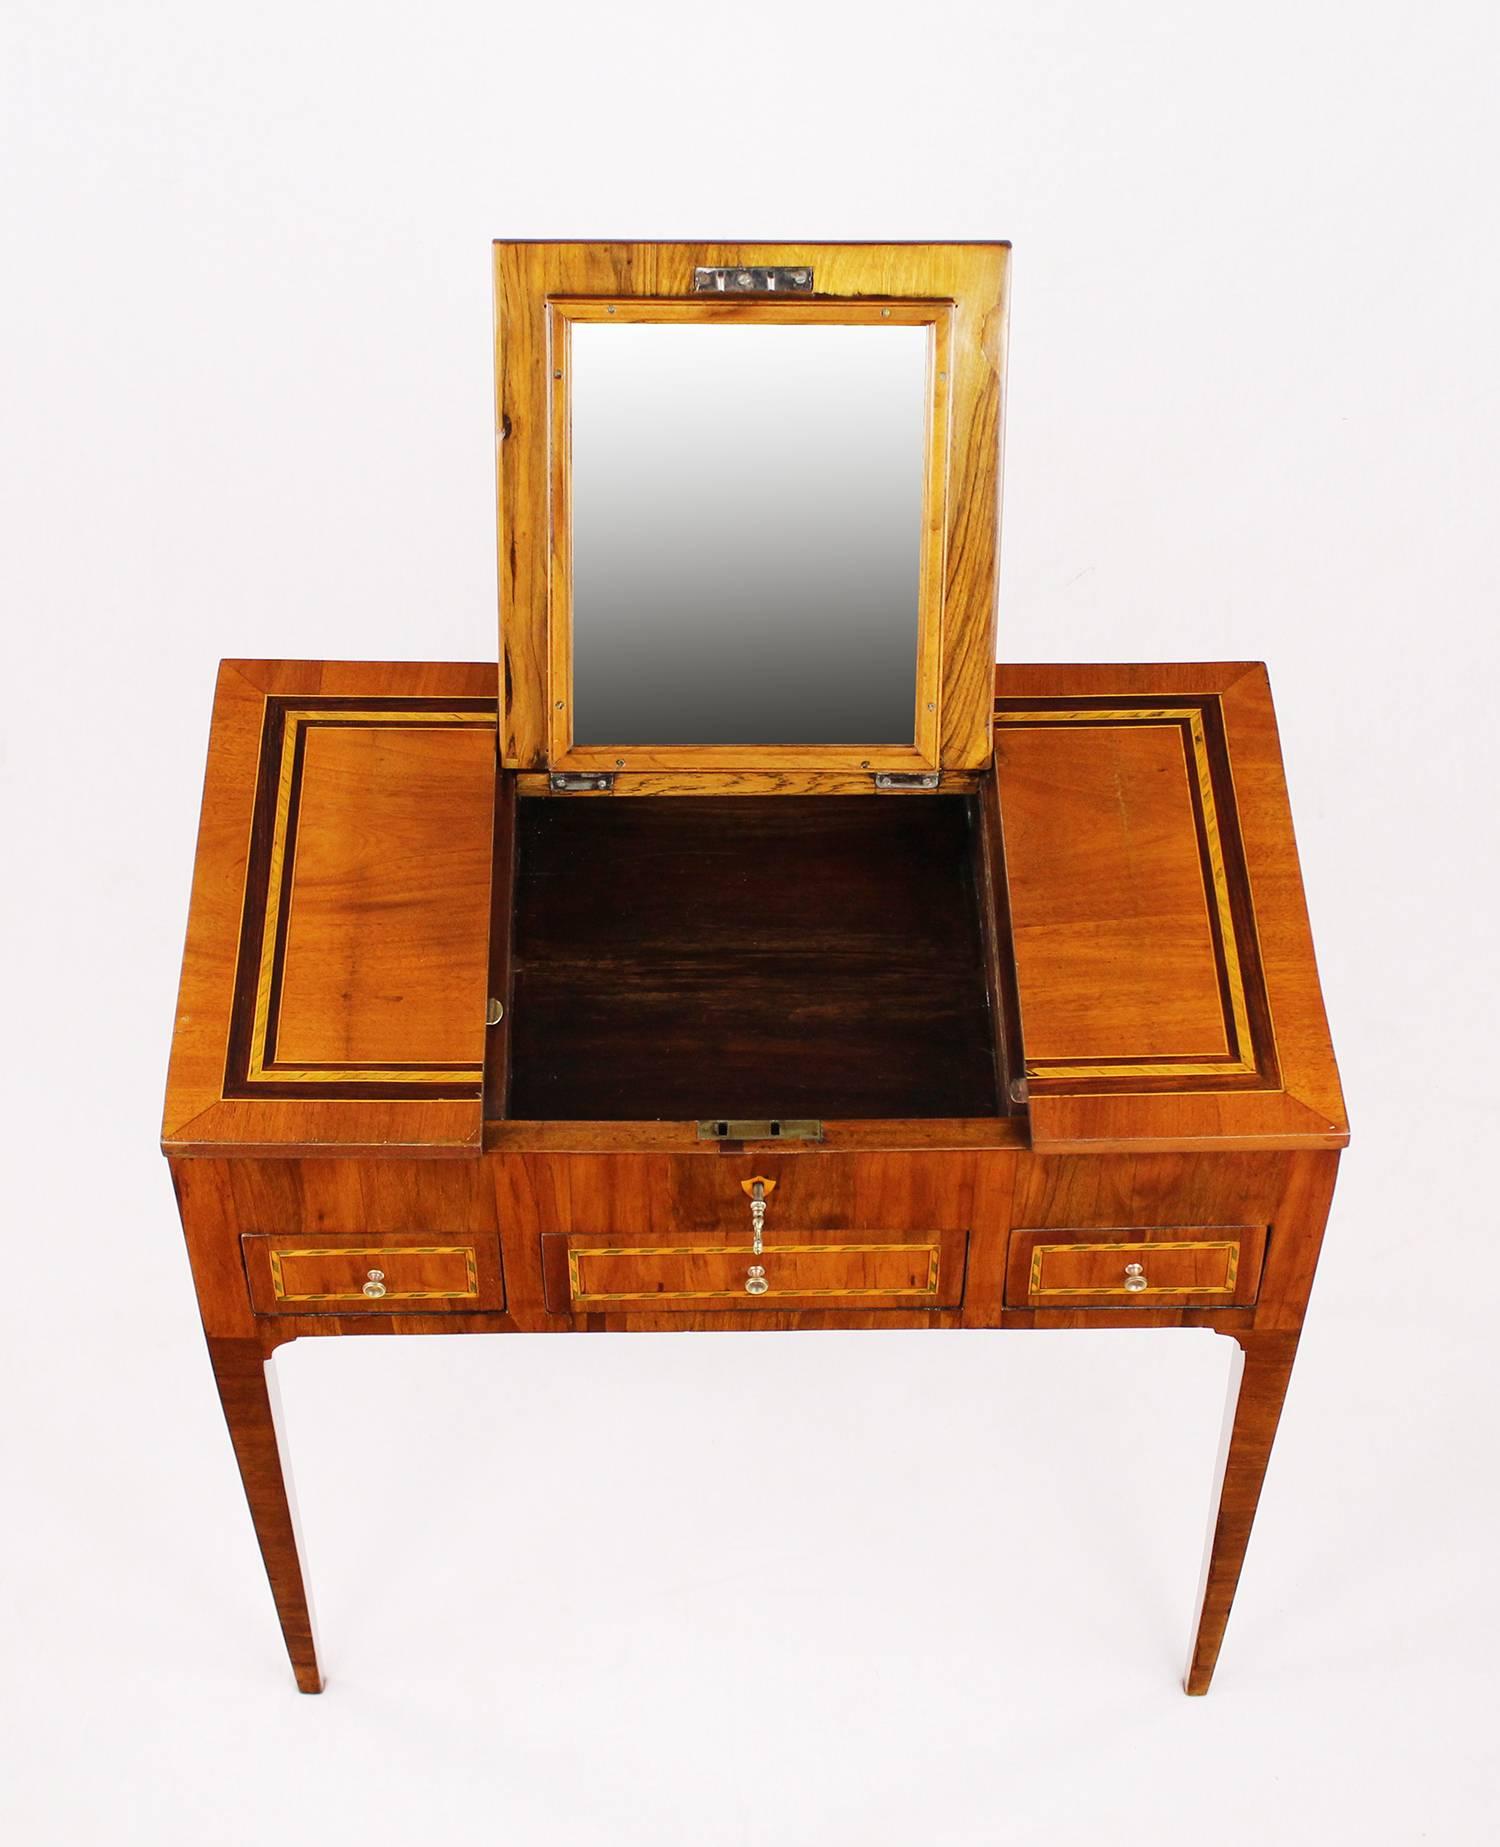 Polished Early 19th Century Dressing Table, Poudreuse, Mahogany Veneered, Marquetry Works